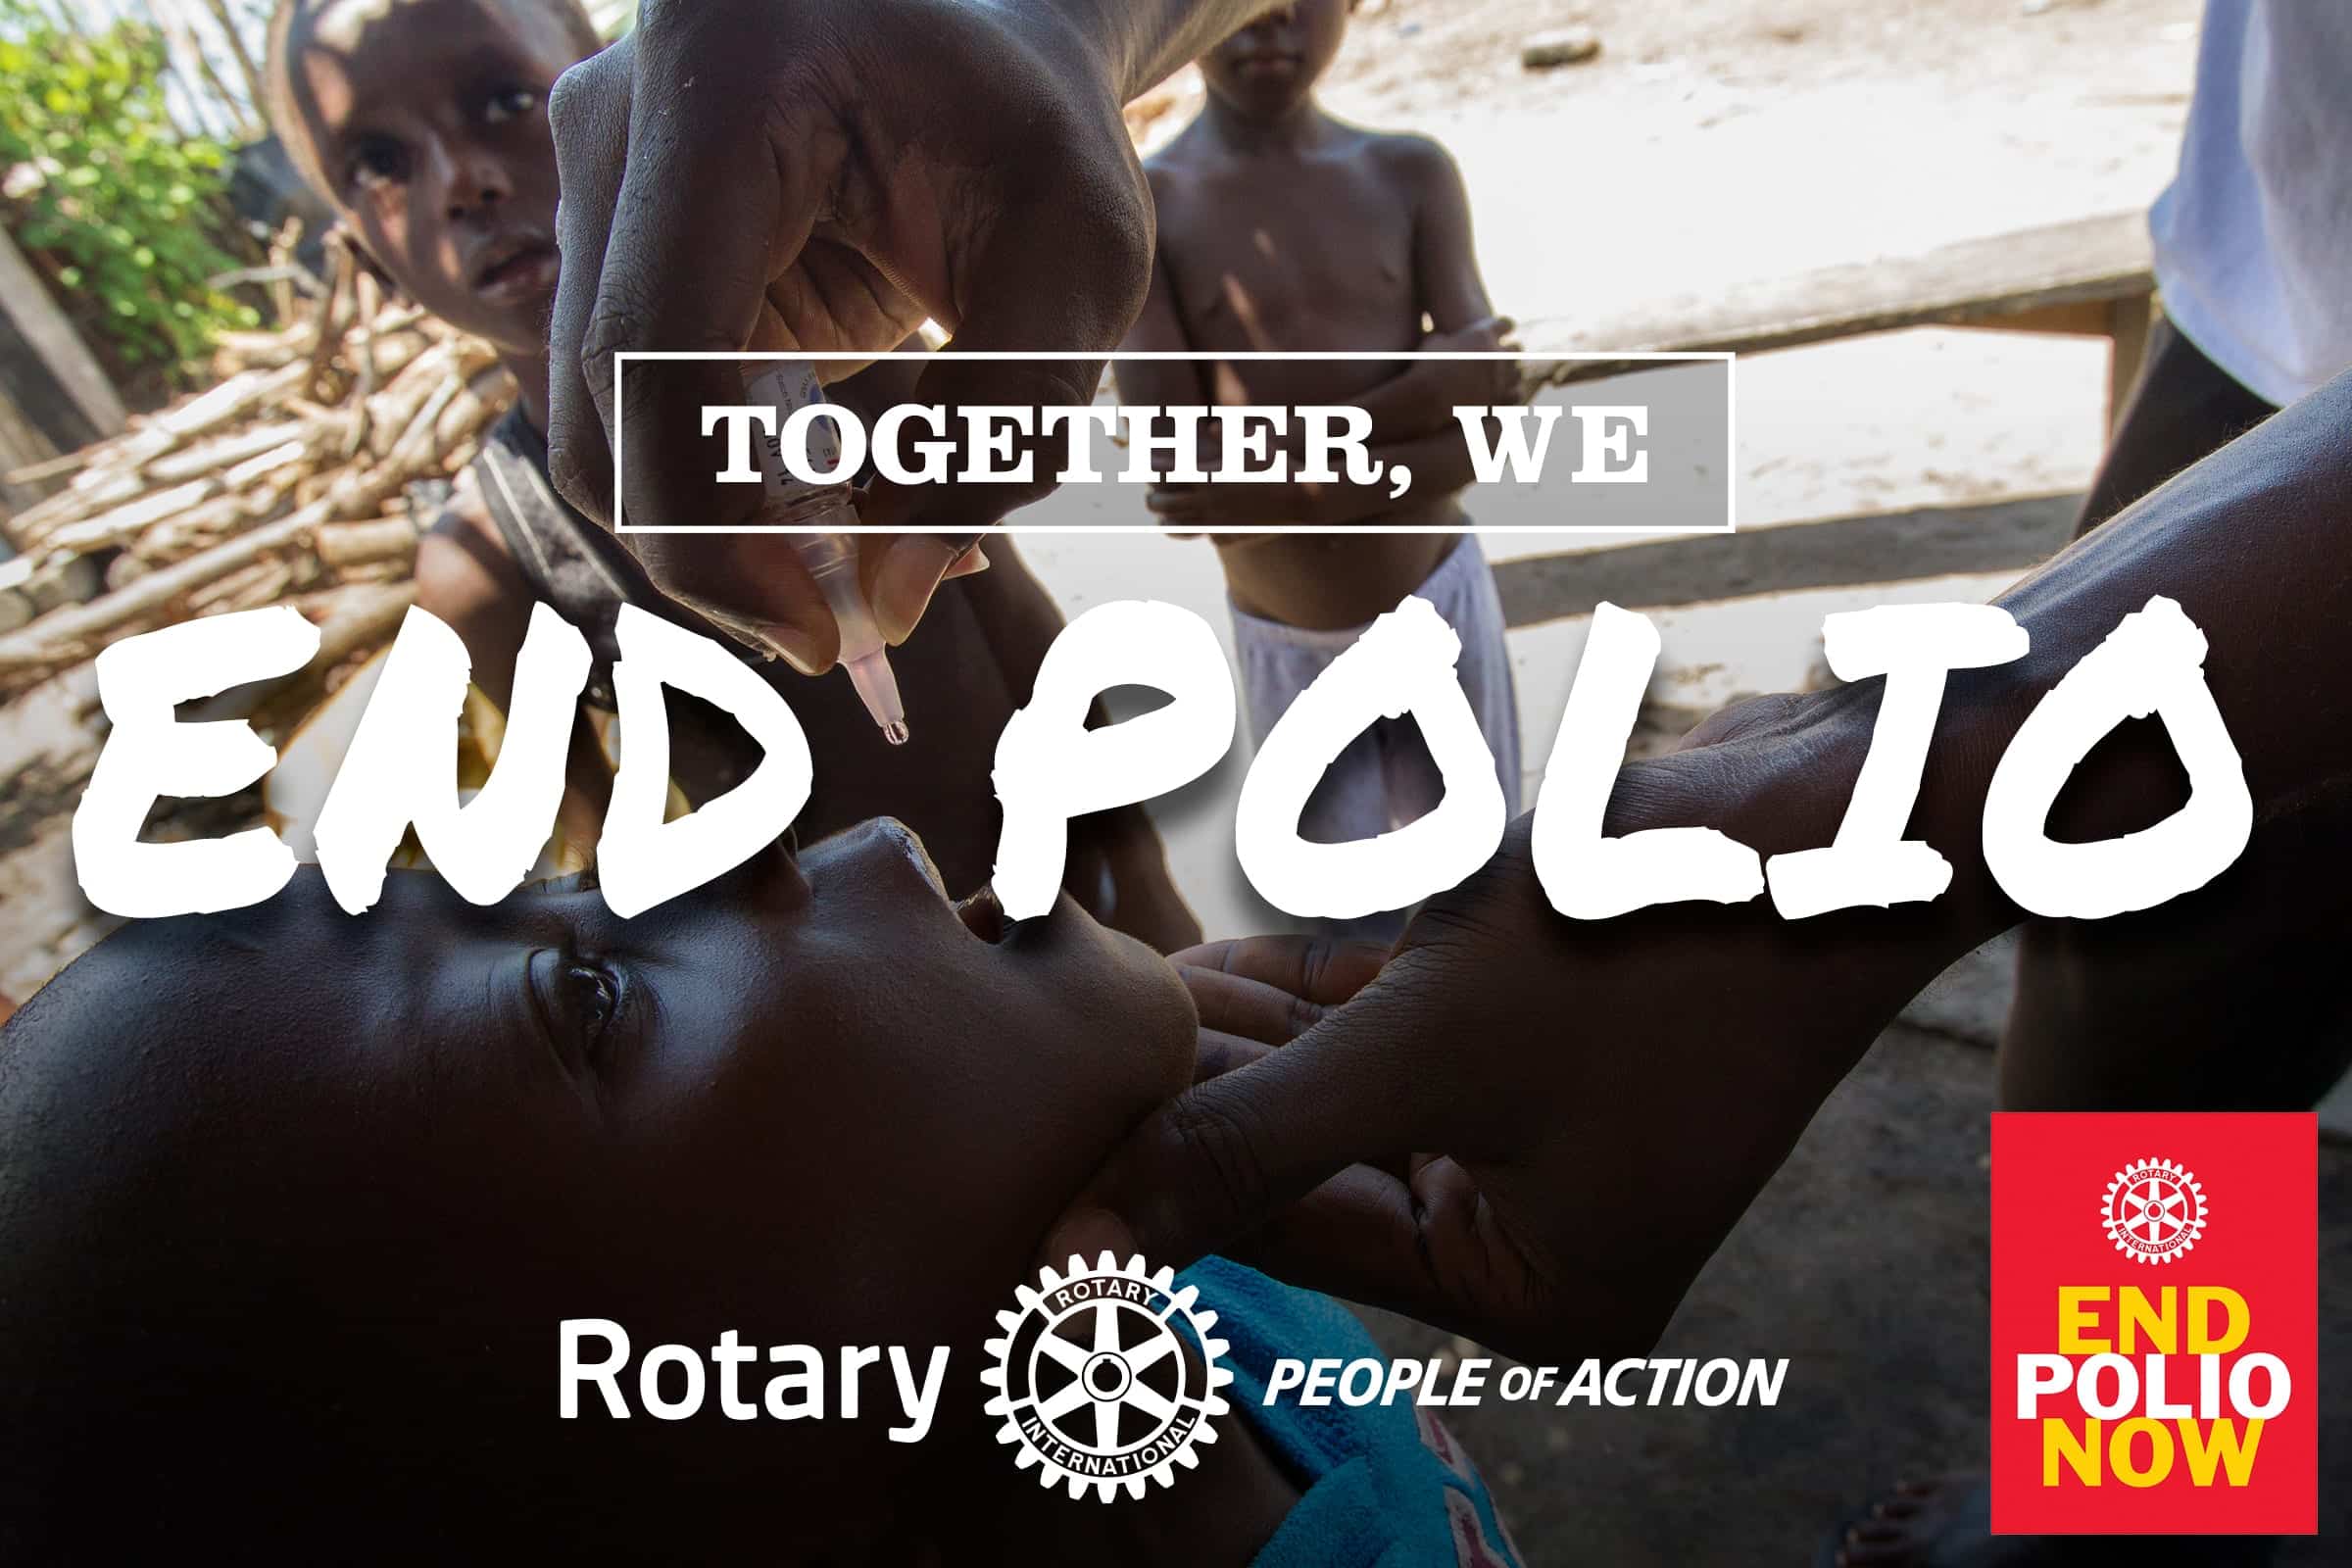 October 24th is World Polio Day | EndPolioNow.org